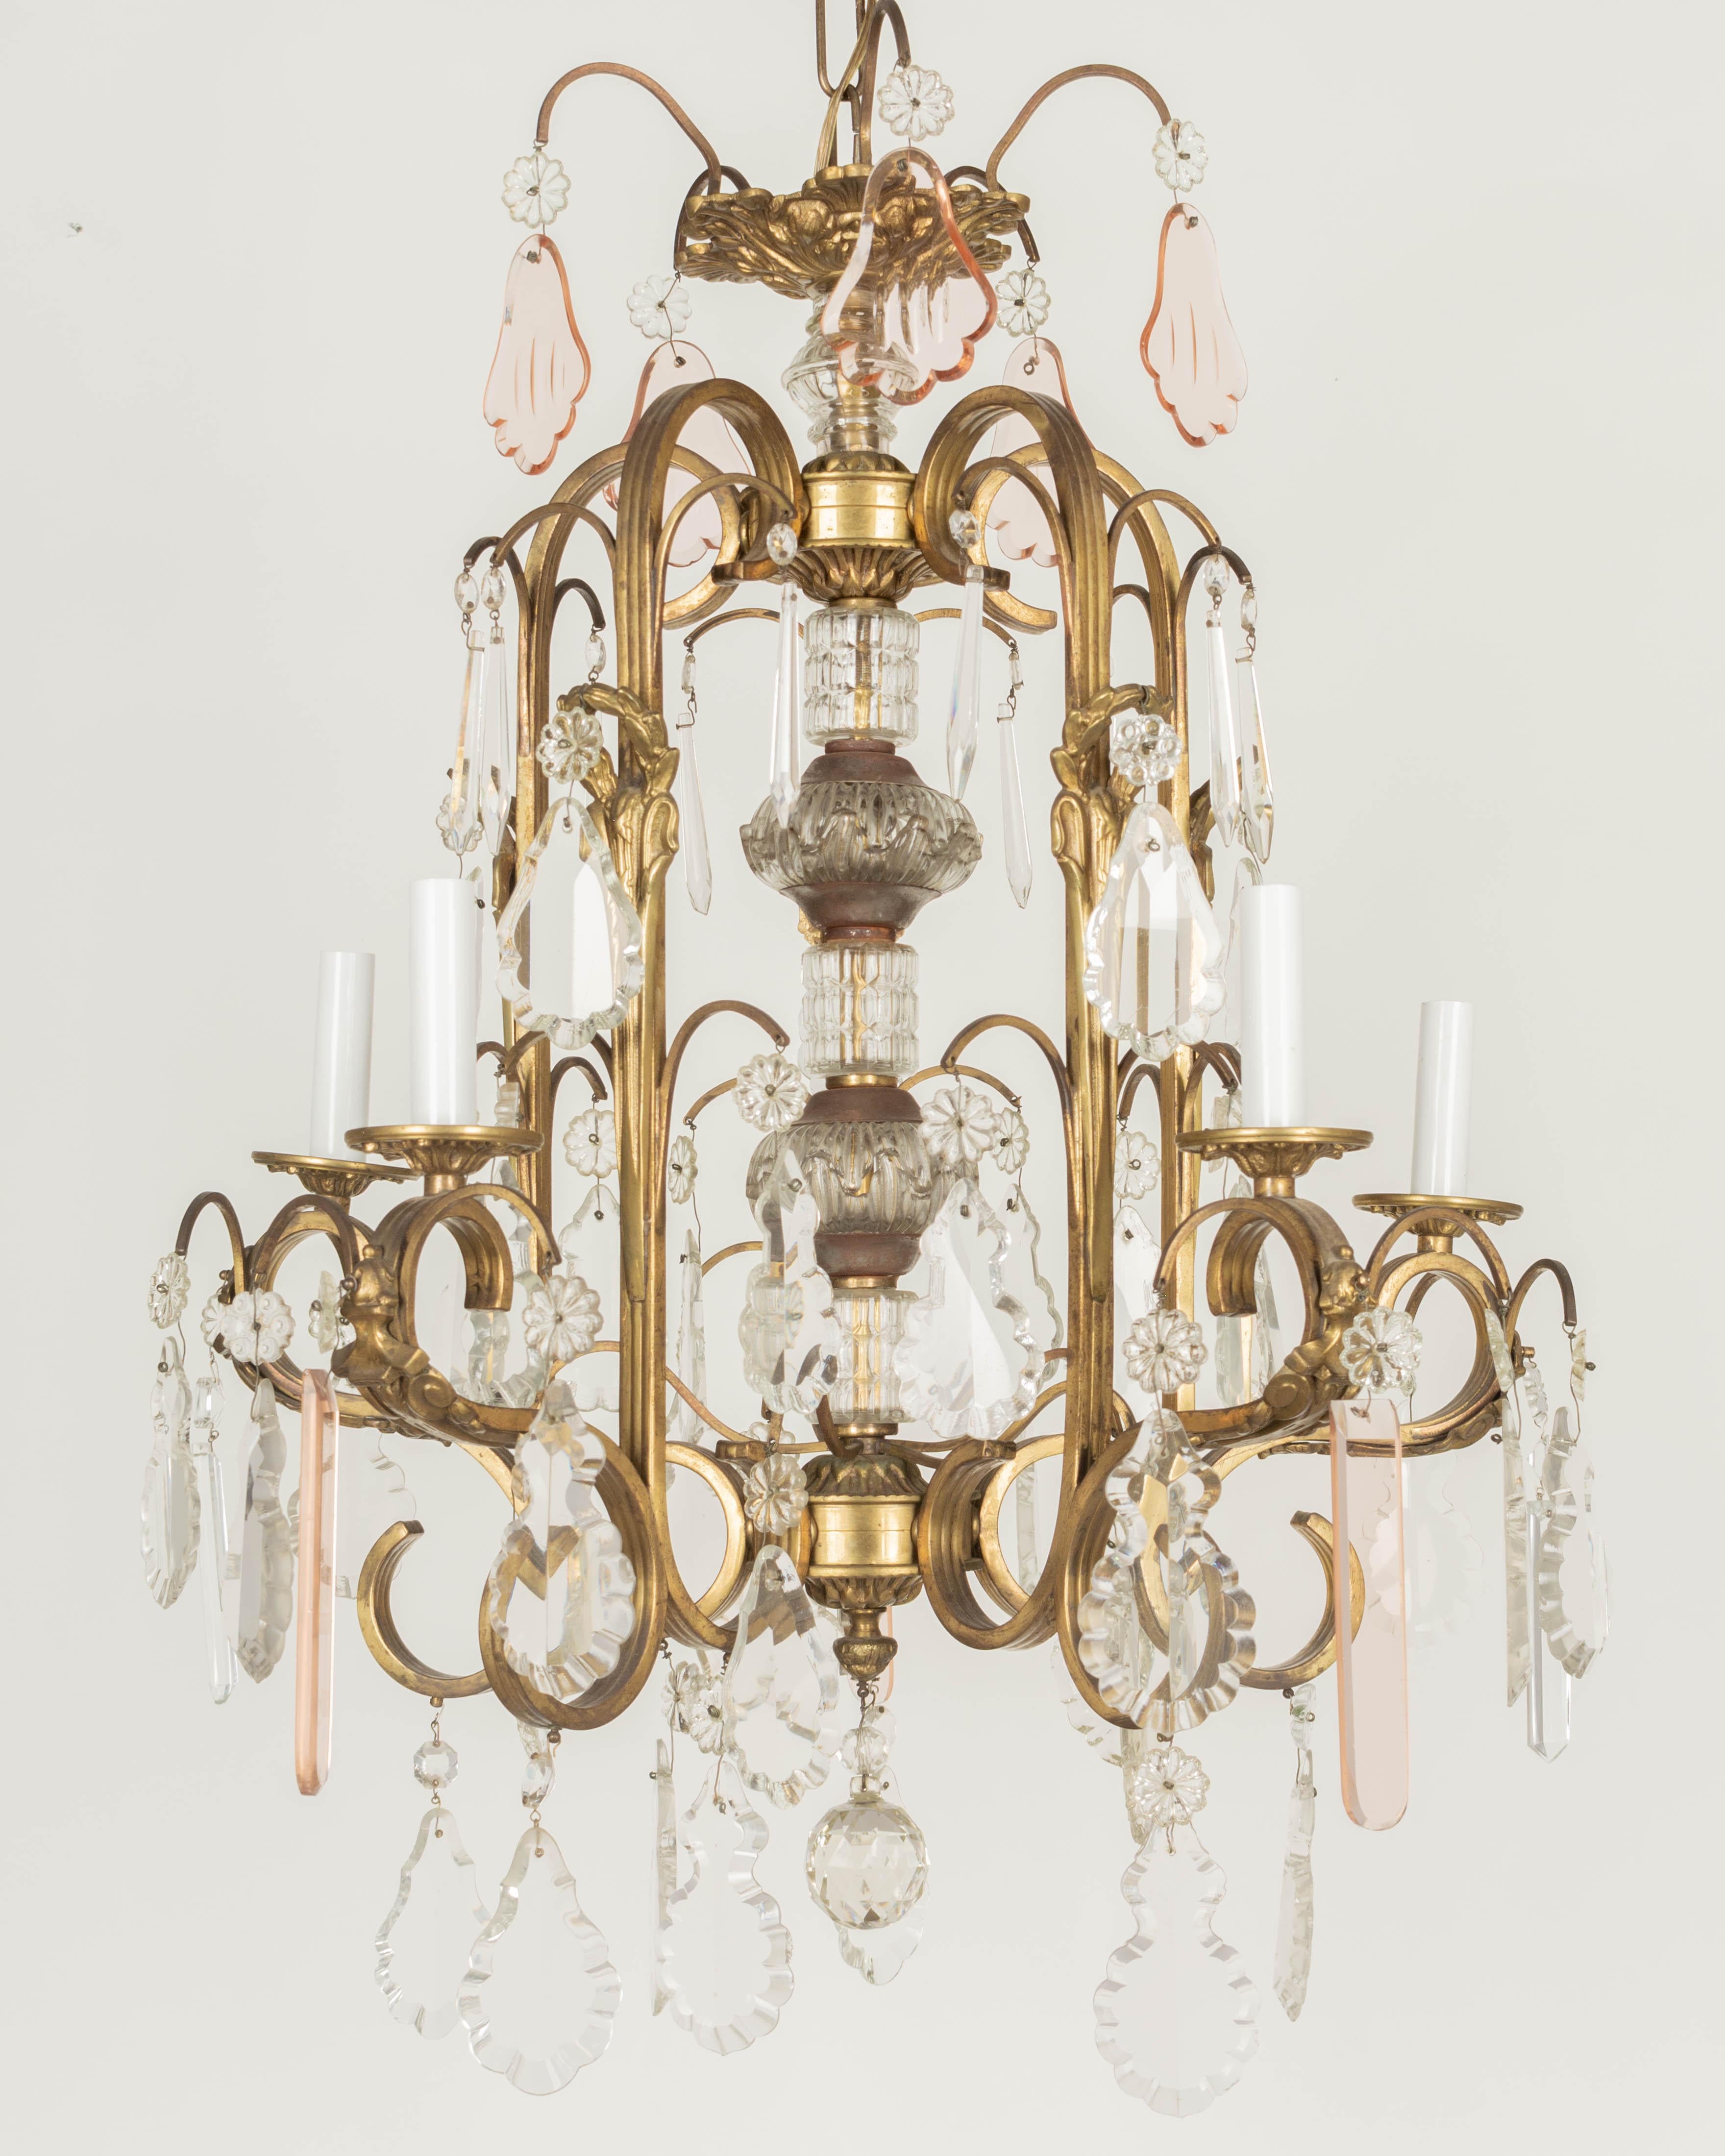 A French Art Deco five-light crystal chandelier. Solid brass flat ribbed tubular frame with scrolled arms with cast brass bobeches and decorative elements. Large center column with cut glass elements. Variety of crystal prisms with rosettes accented